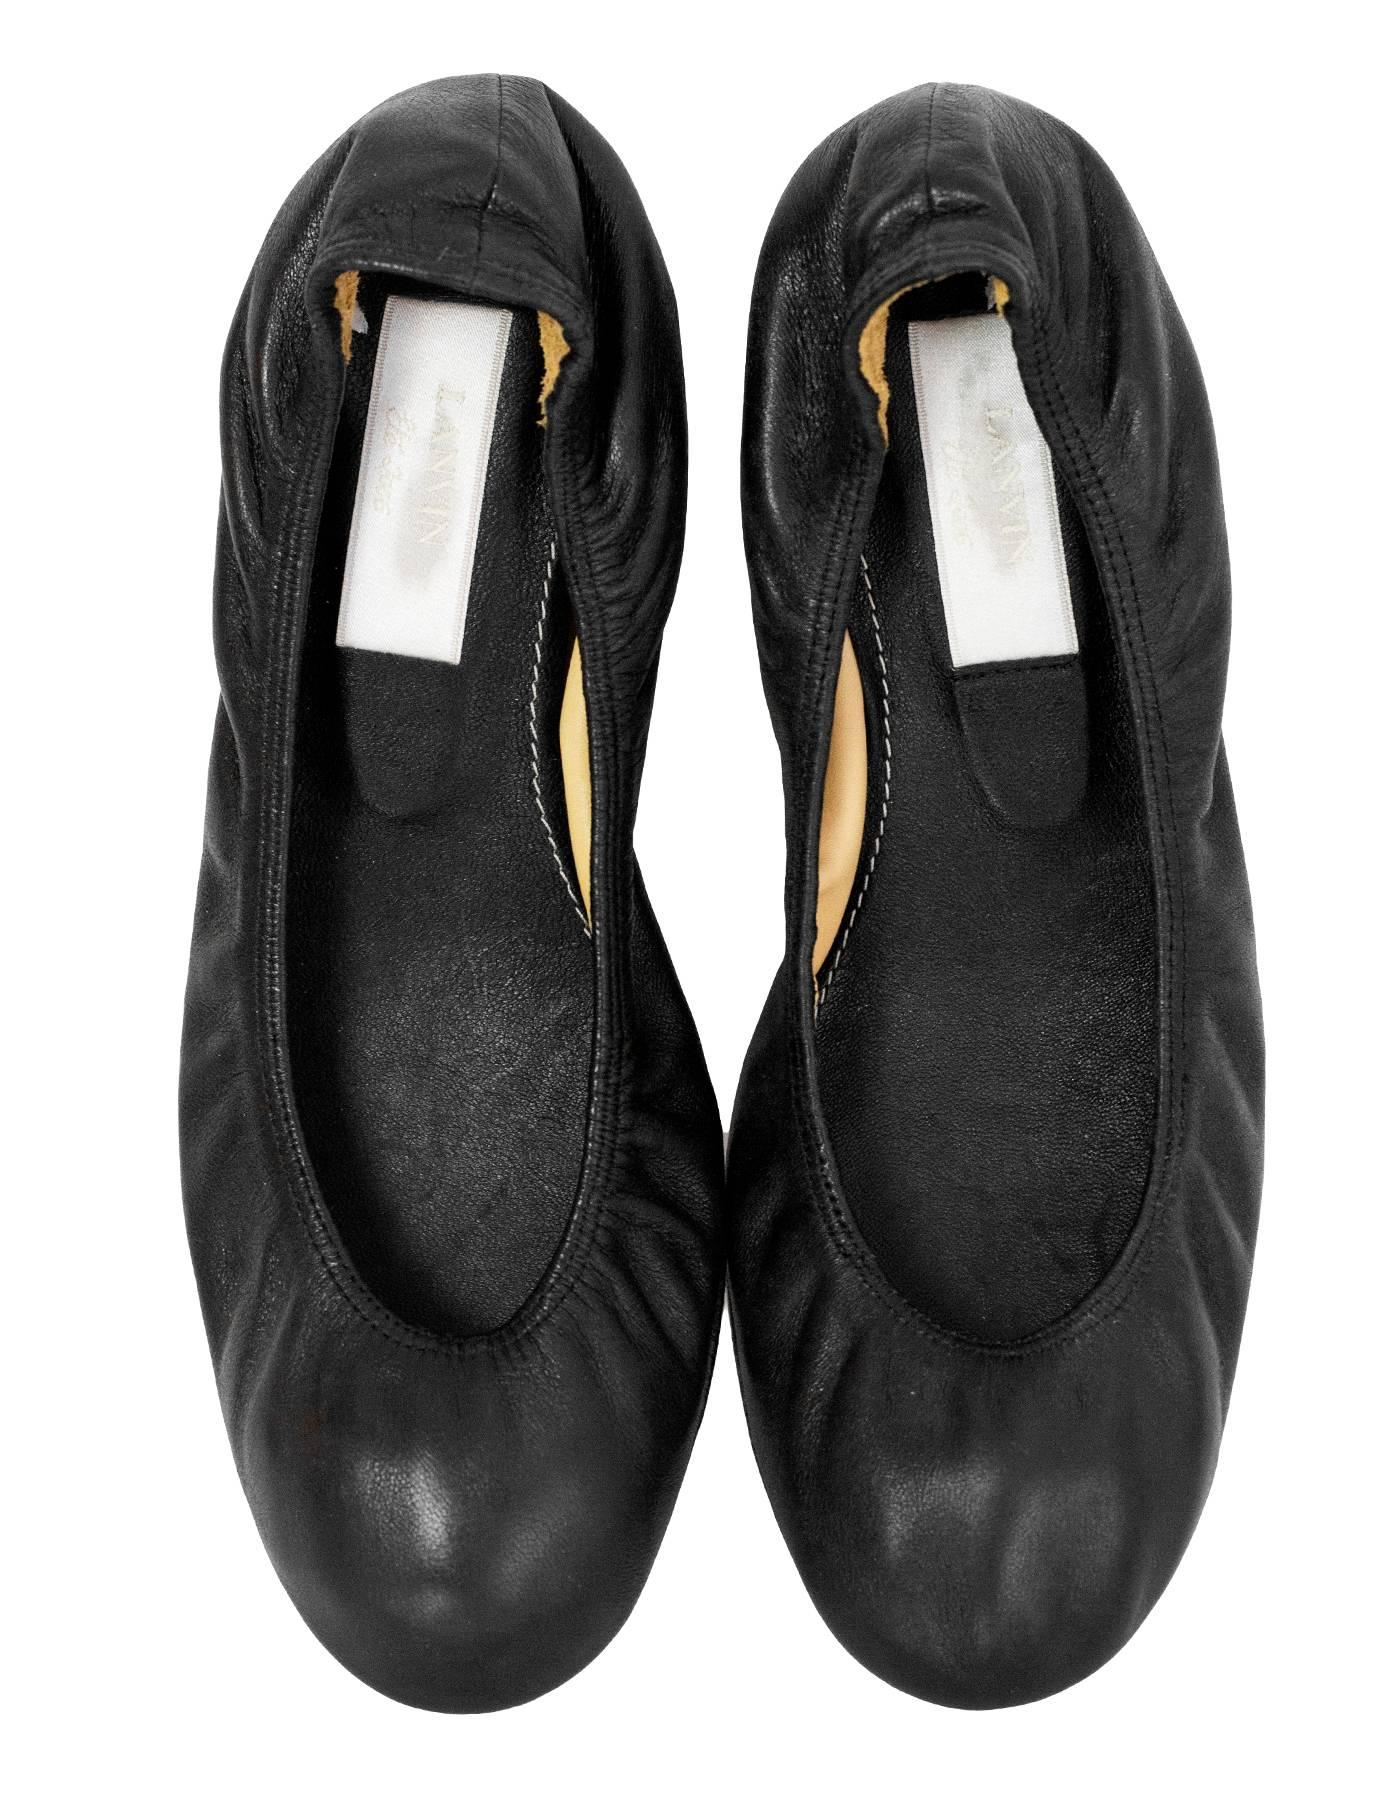 Lanvin Black Leather Stretch Flats Sz 39 NIB In Excellent Condition In New York, NY